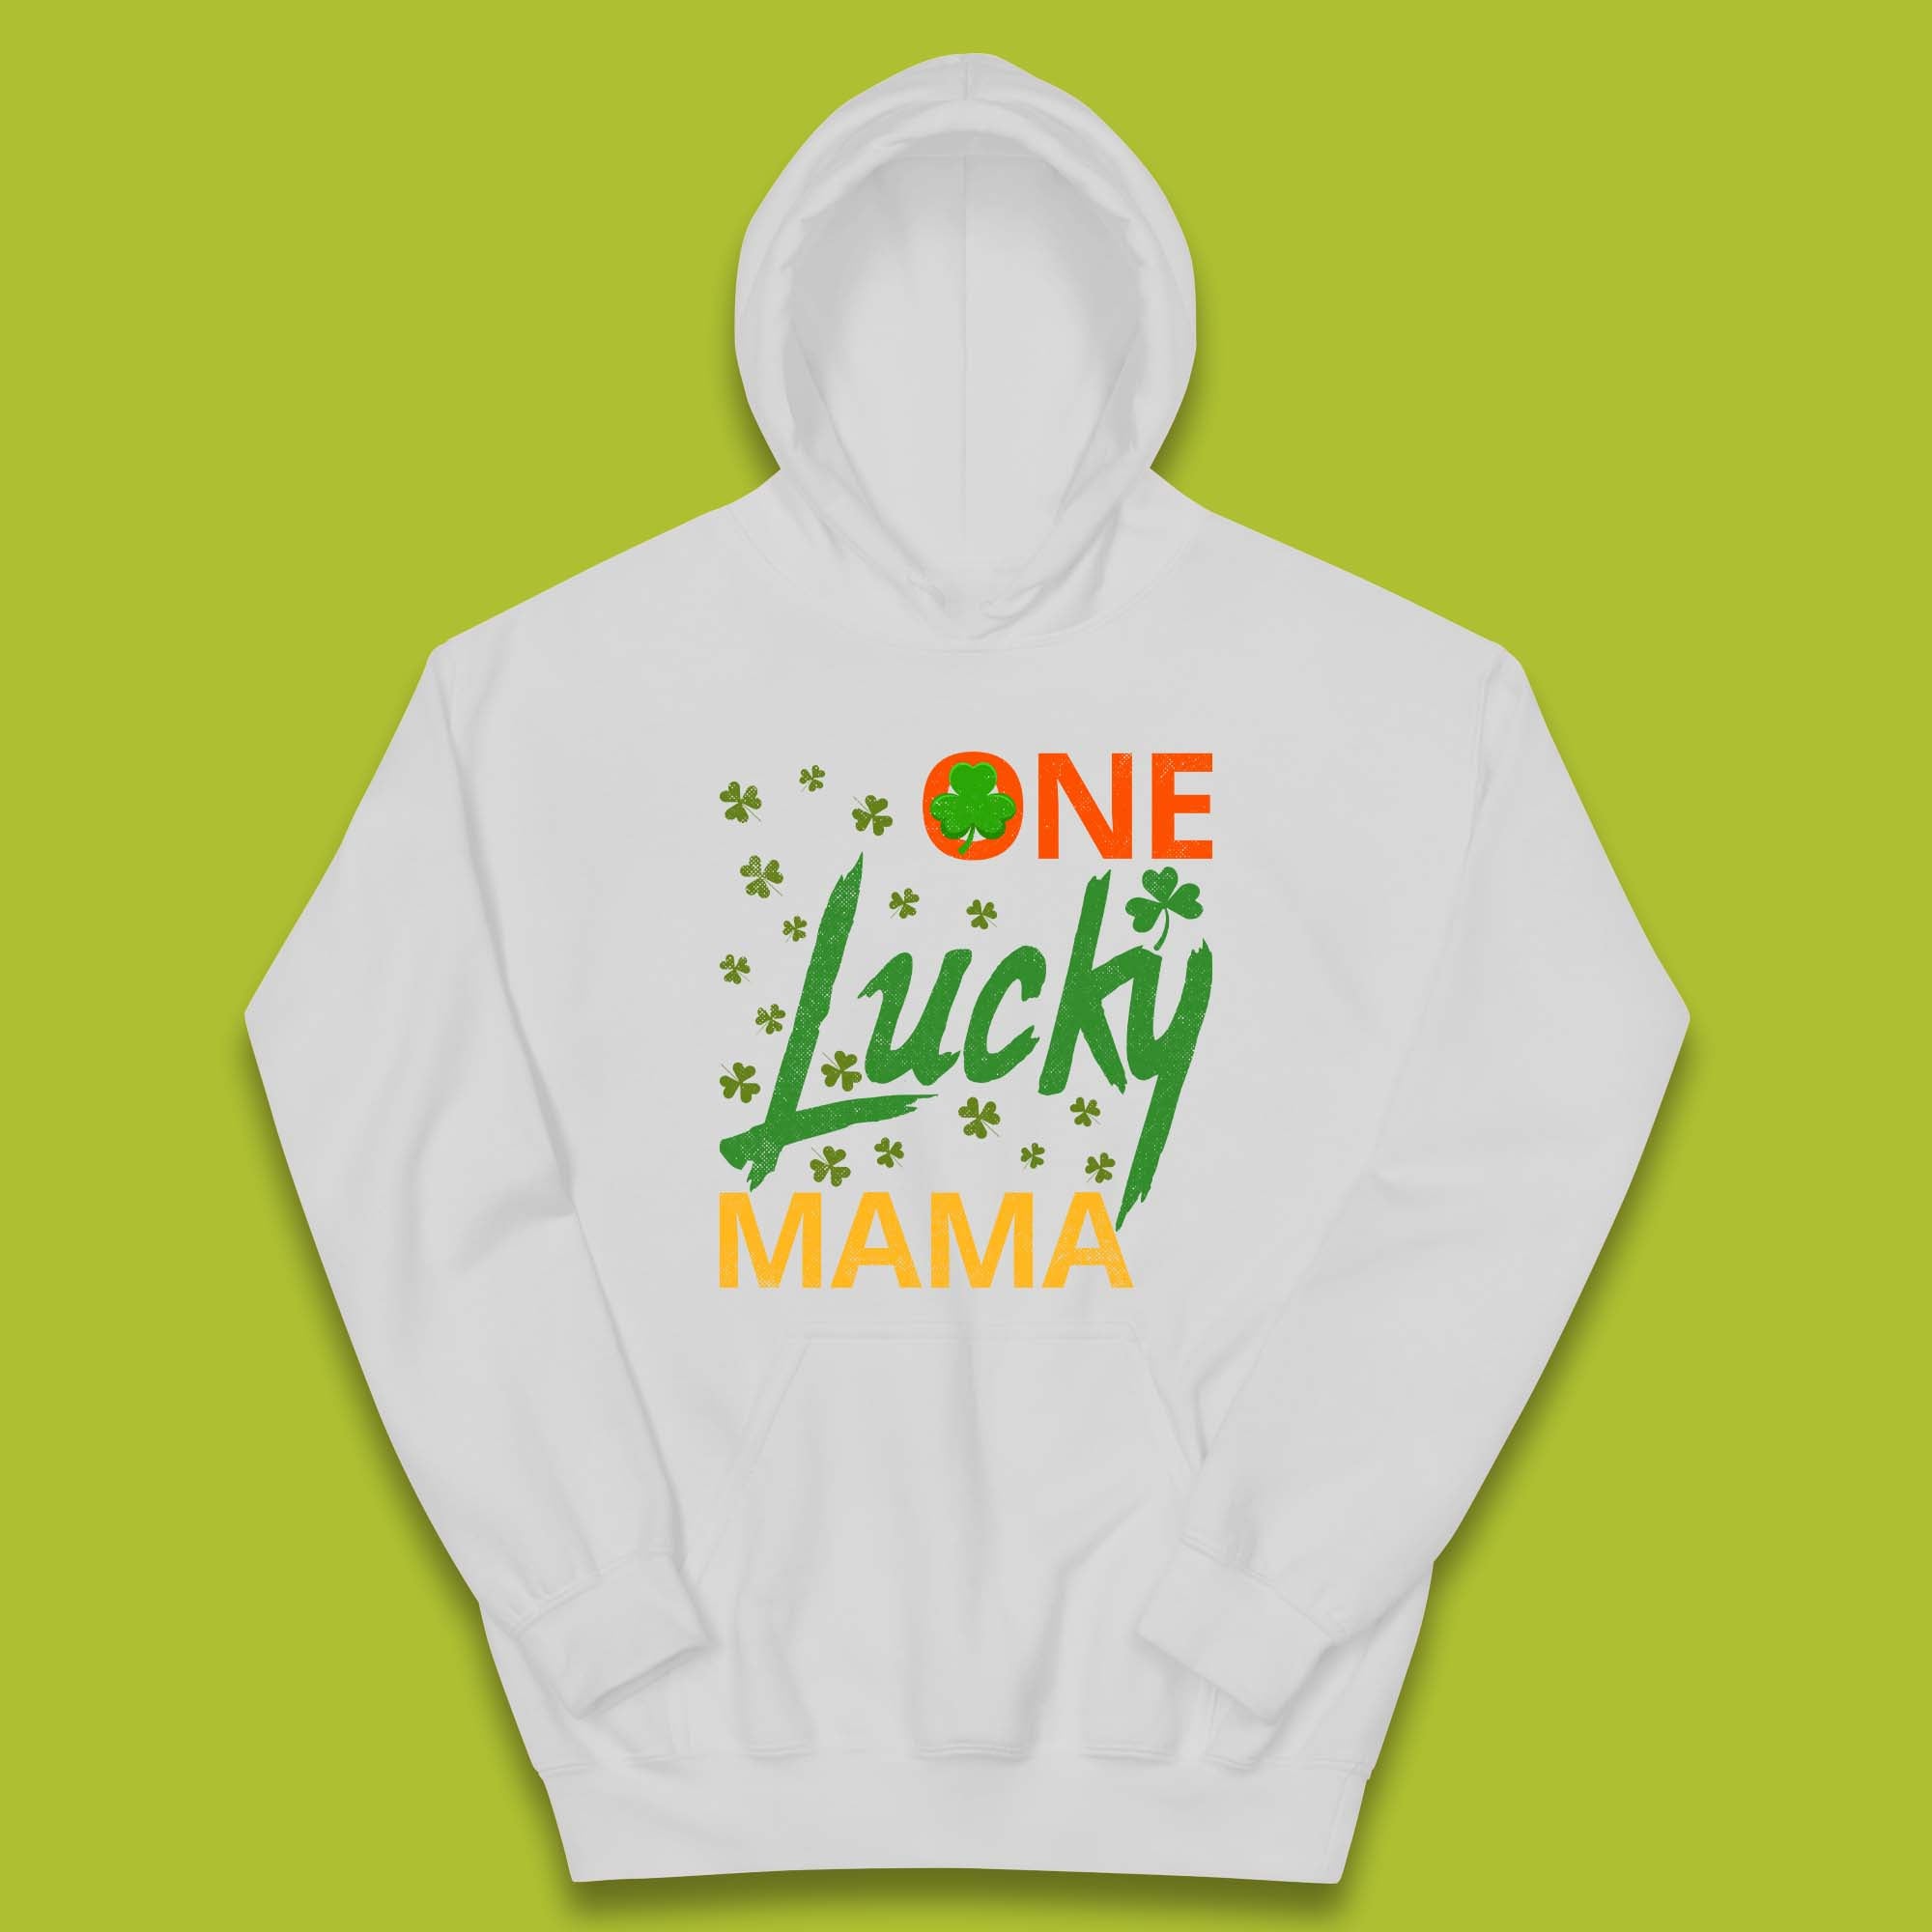 One Lucky Mama Patrick's Day Kids Hoodie